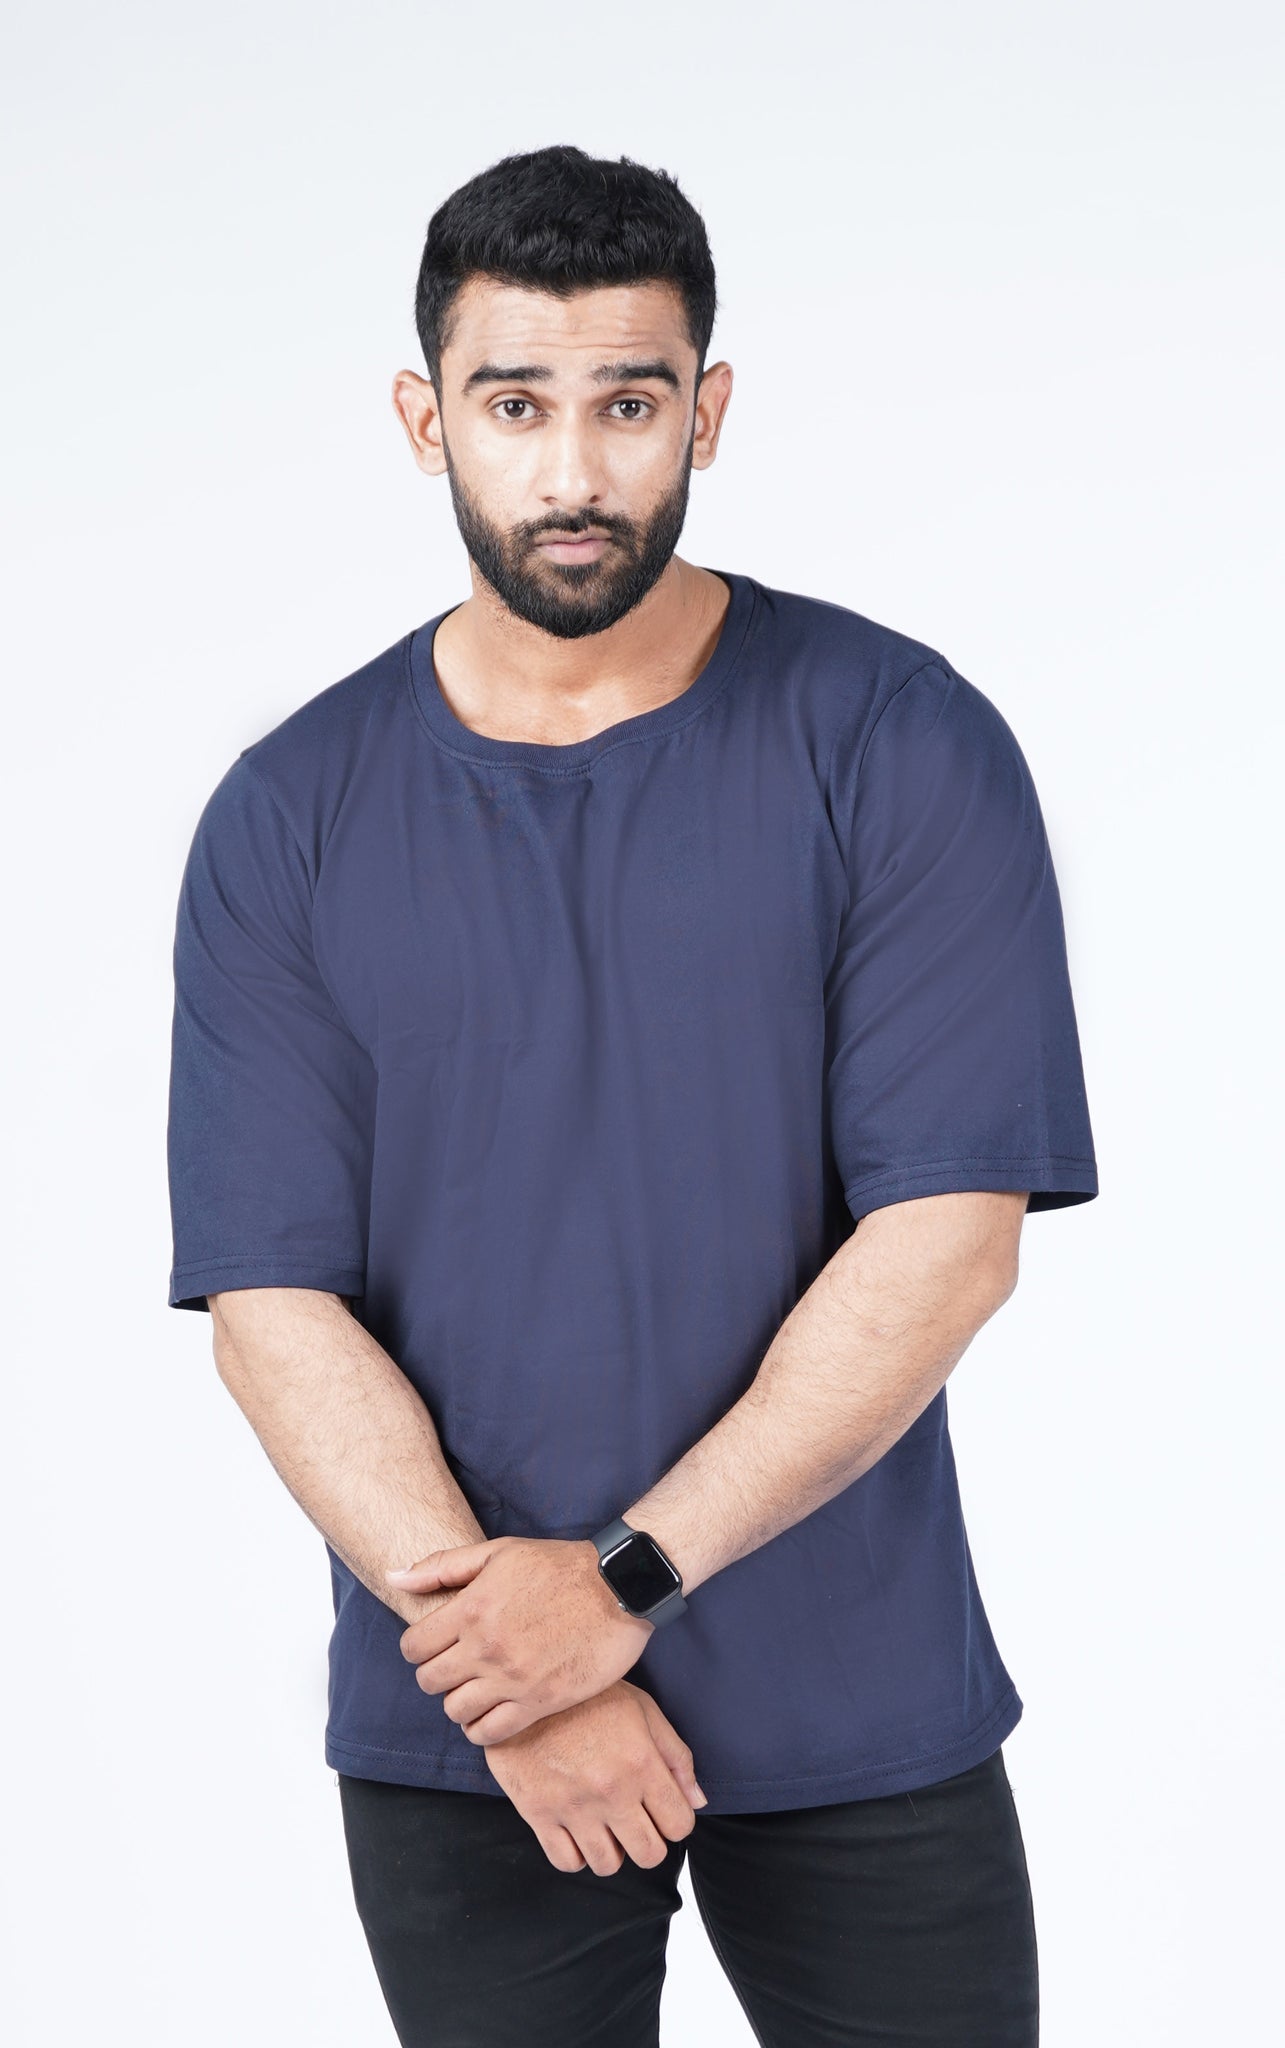 Oversized Navy Solid T-shirt Crew Cut/Round Neck Elbow length Sleeves